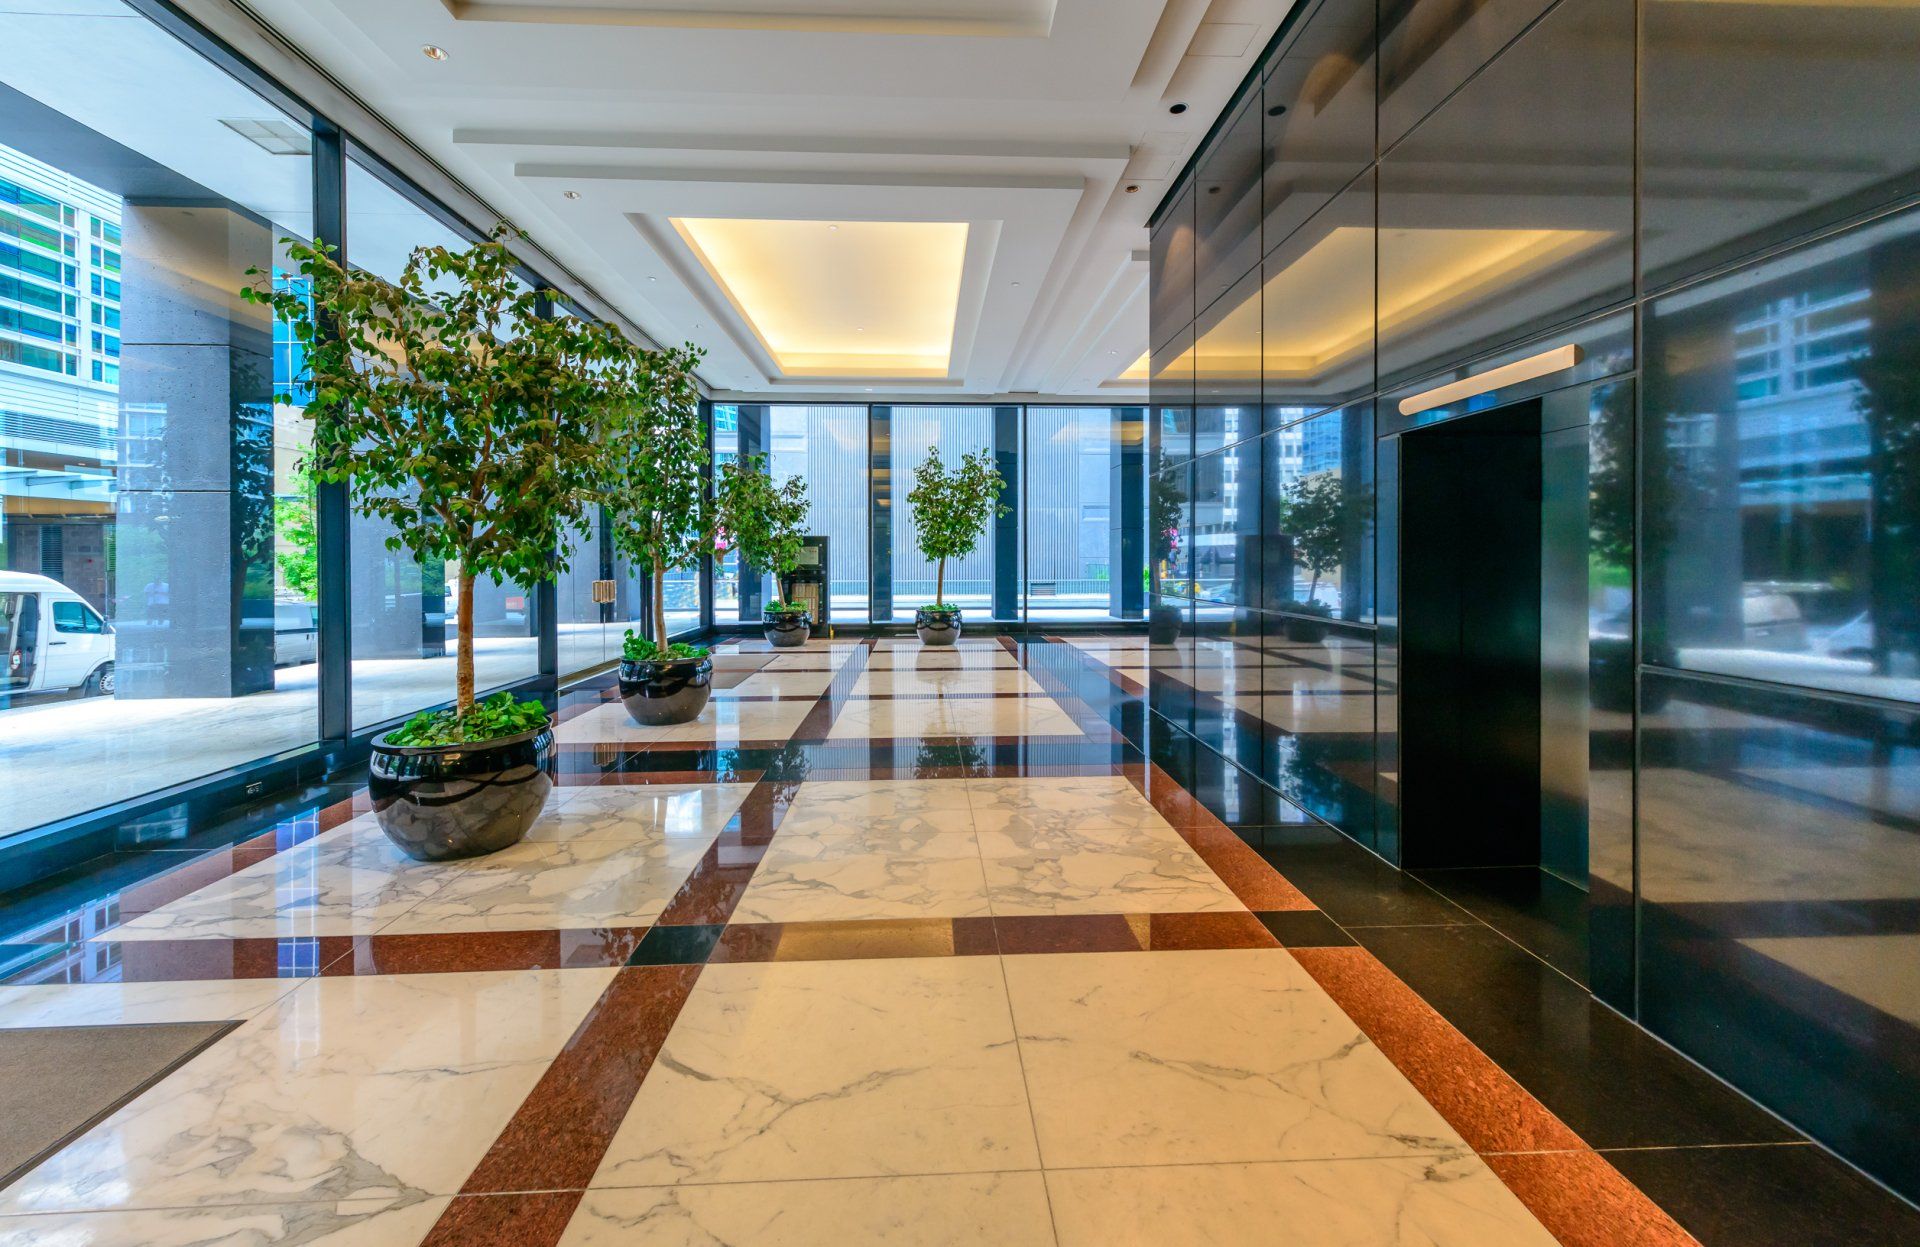 Perspective of the modern lobby, hallway of the luxury hotel, shopping mall, business center in Vancouver, Canada. Interior design.